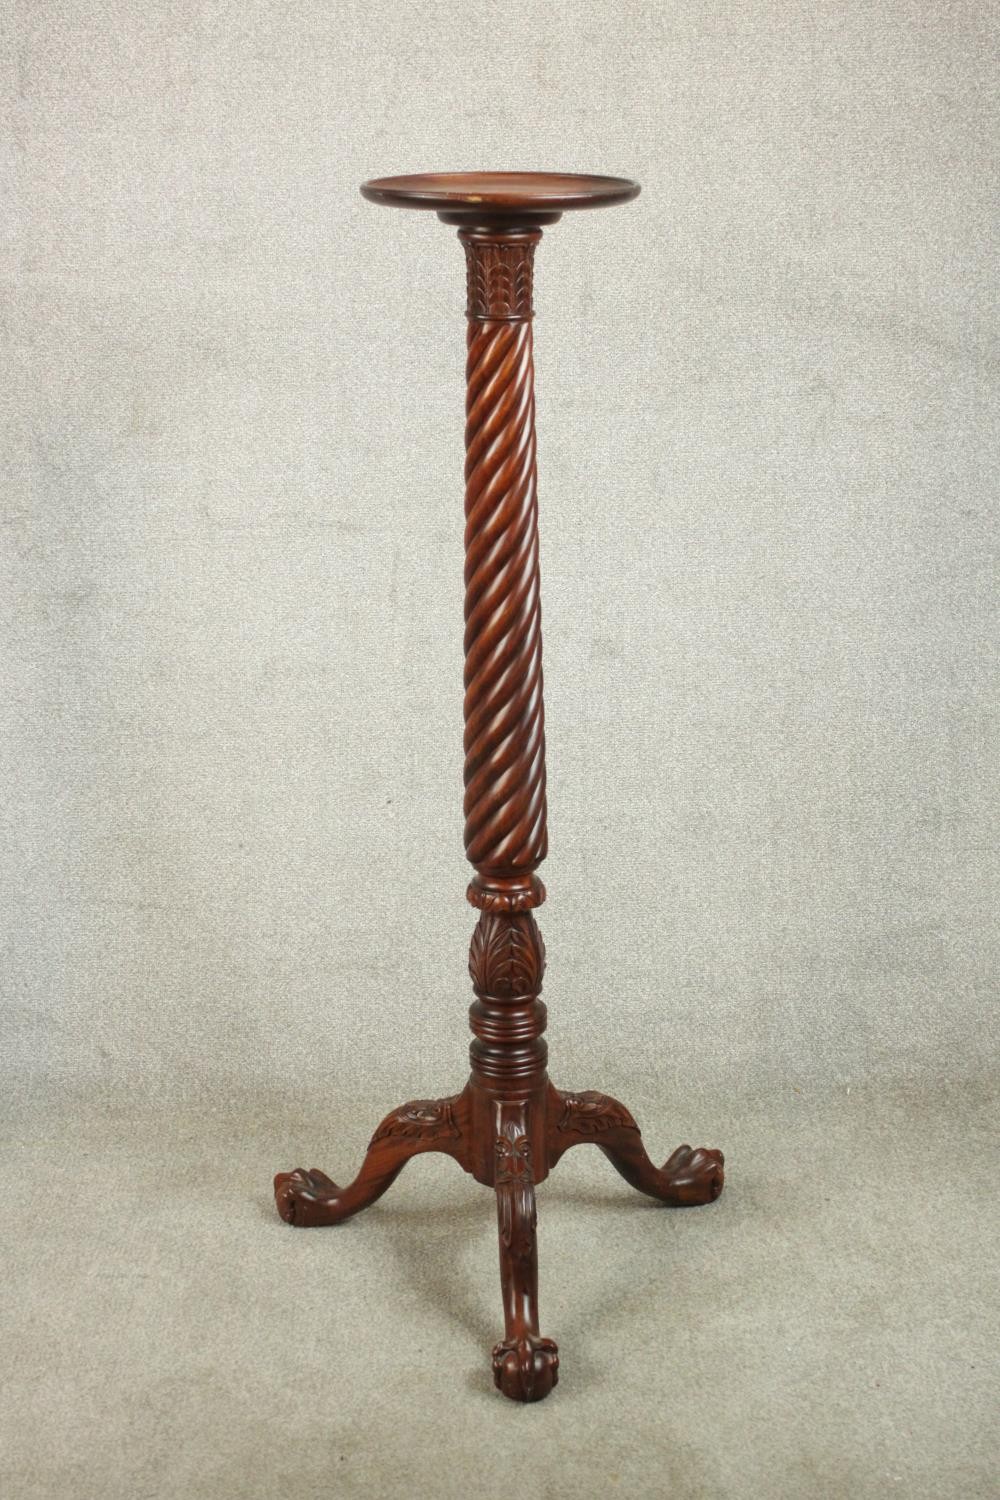 A Victorian style mahogany torchere, with a dished top on a wrythen column on tripod legs - Image 2 of 7